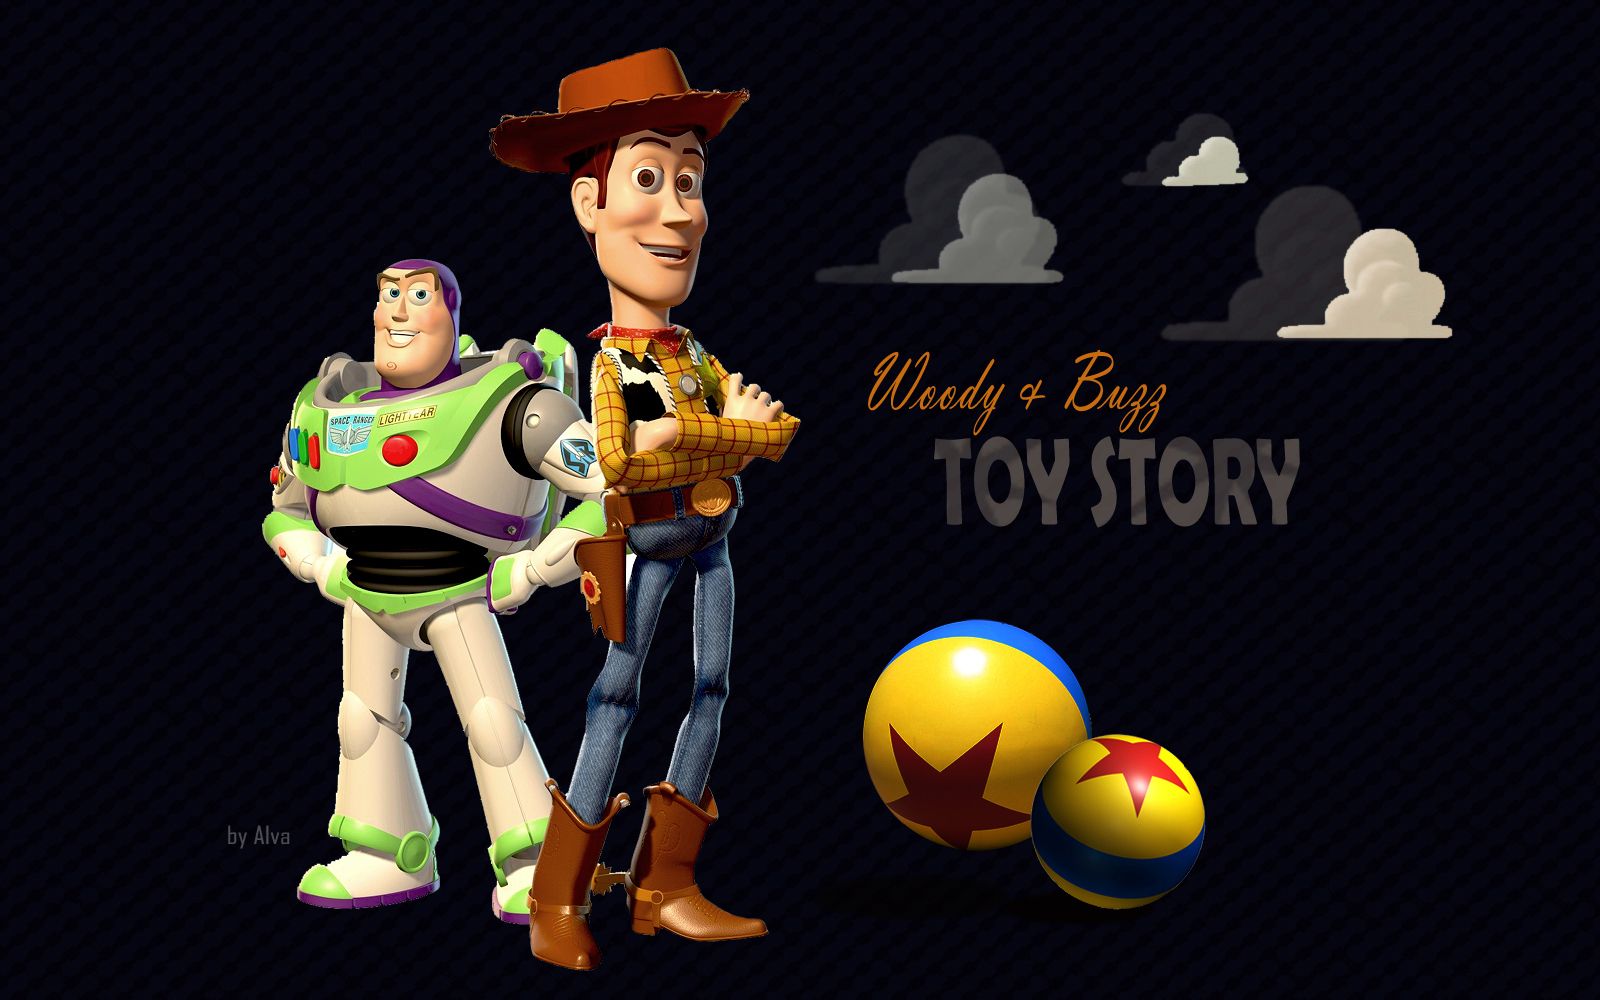 Woody-And-Buzz-Toy-Story-Wallpapers-High-Definition.jpg